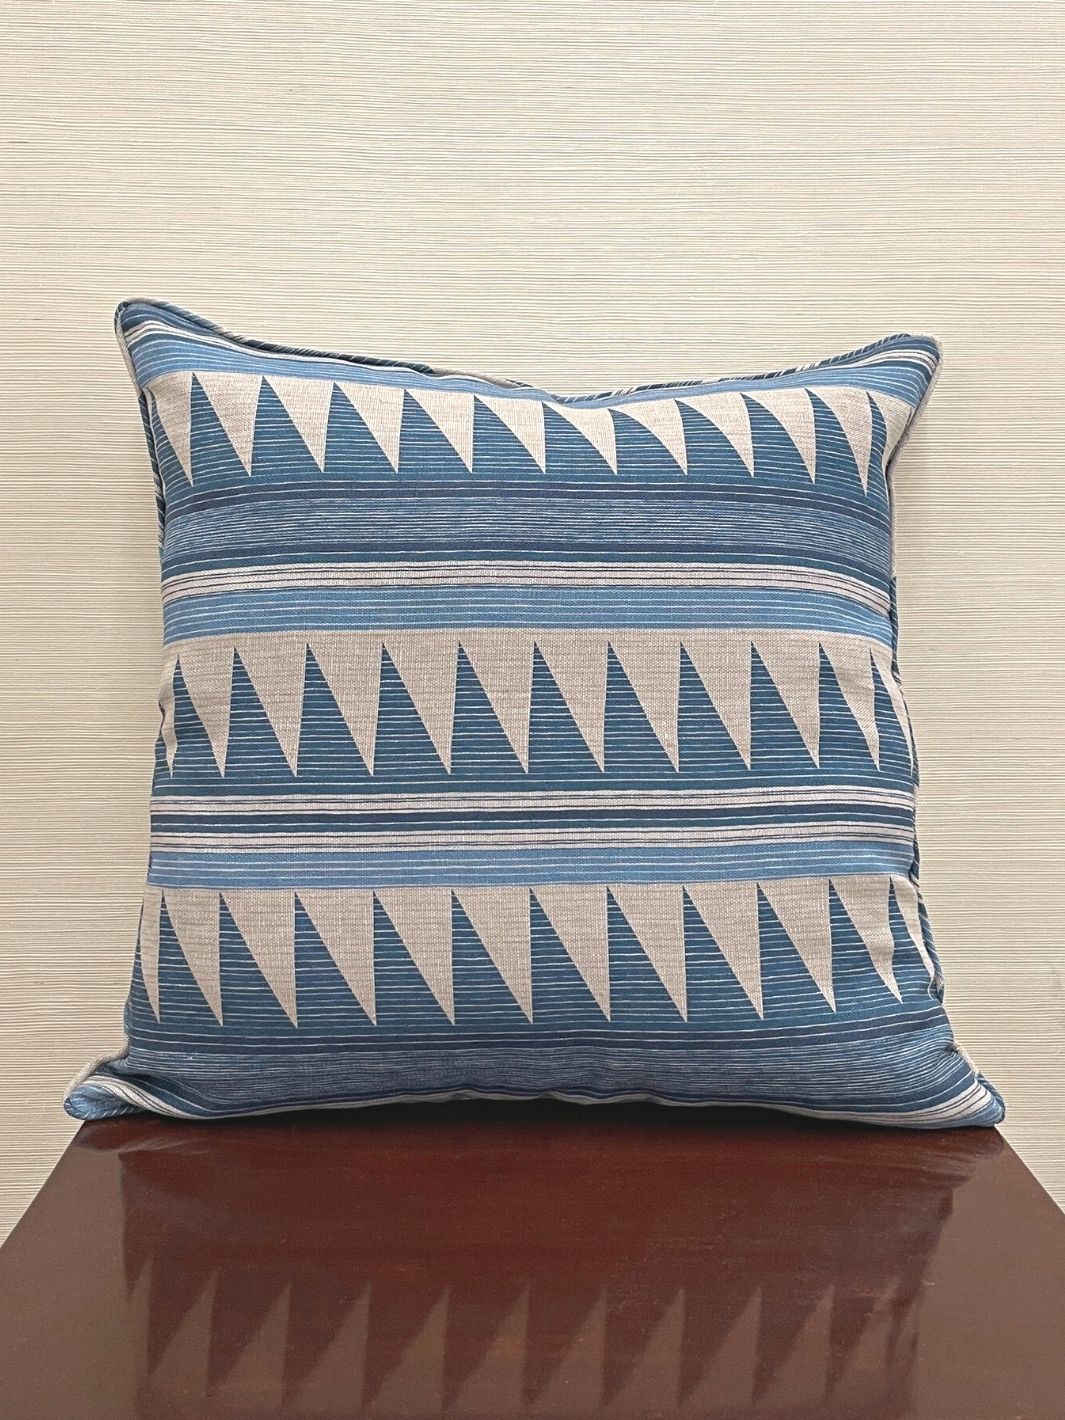 'Edwin Stripe' Throw Pillow by Nathan Turner 20x20 - Blue on Flax Linen